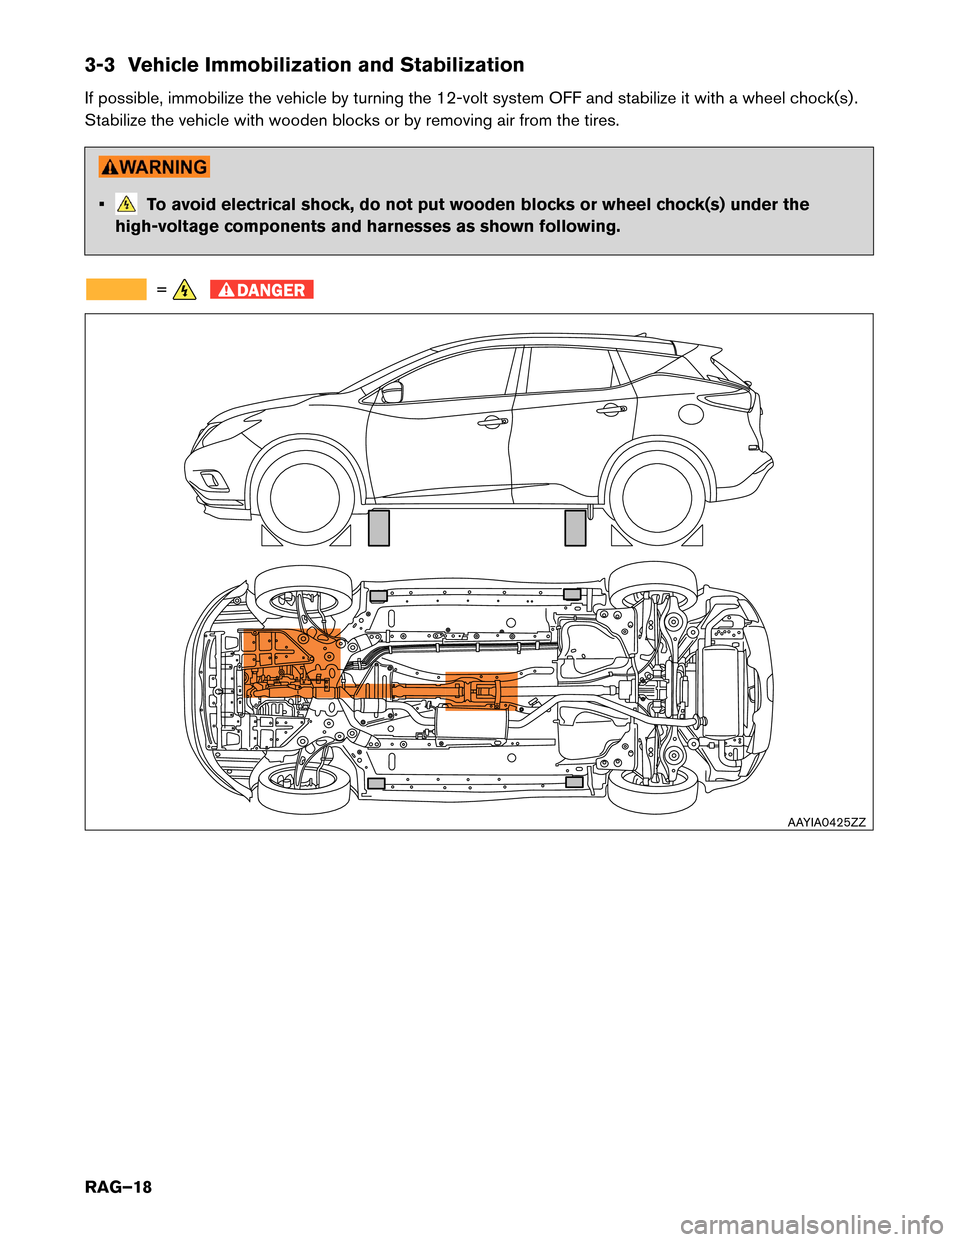 NISSAN MURANO HYBRID 2016 3.G Roadside Assistance Guide 3-3 Vehicle Immobilization and Stabilization
If
possible, immobilize the vehicle by turning the 12-volt system OFF and stabilize it with a wheel chock(s) .
Stabilize the vehicle with wooden blocks or 